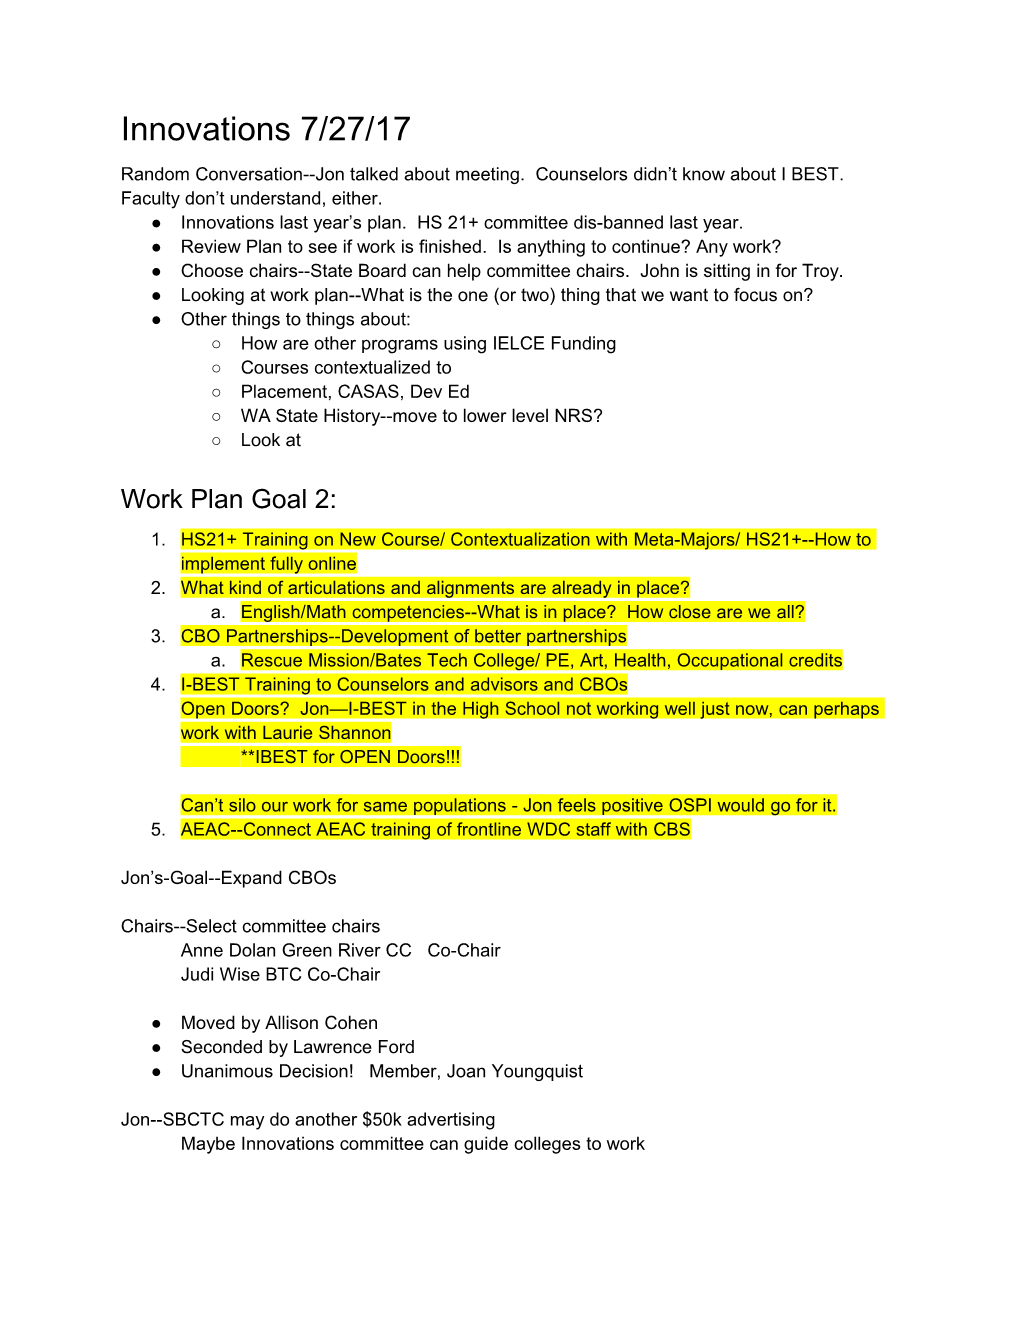 Innovations Last Year S Plan. HS 21+ Committee Dis-Banned Last Year